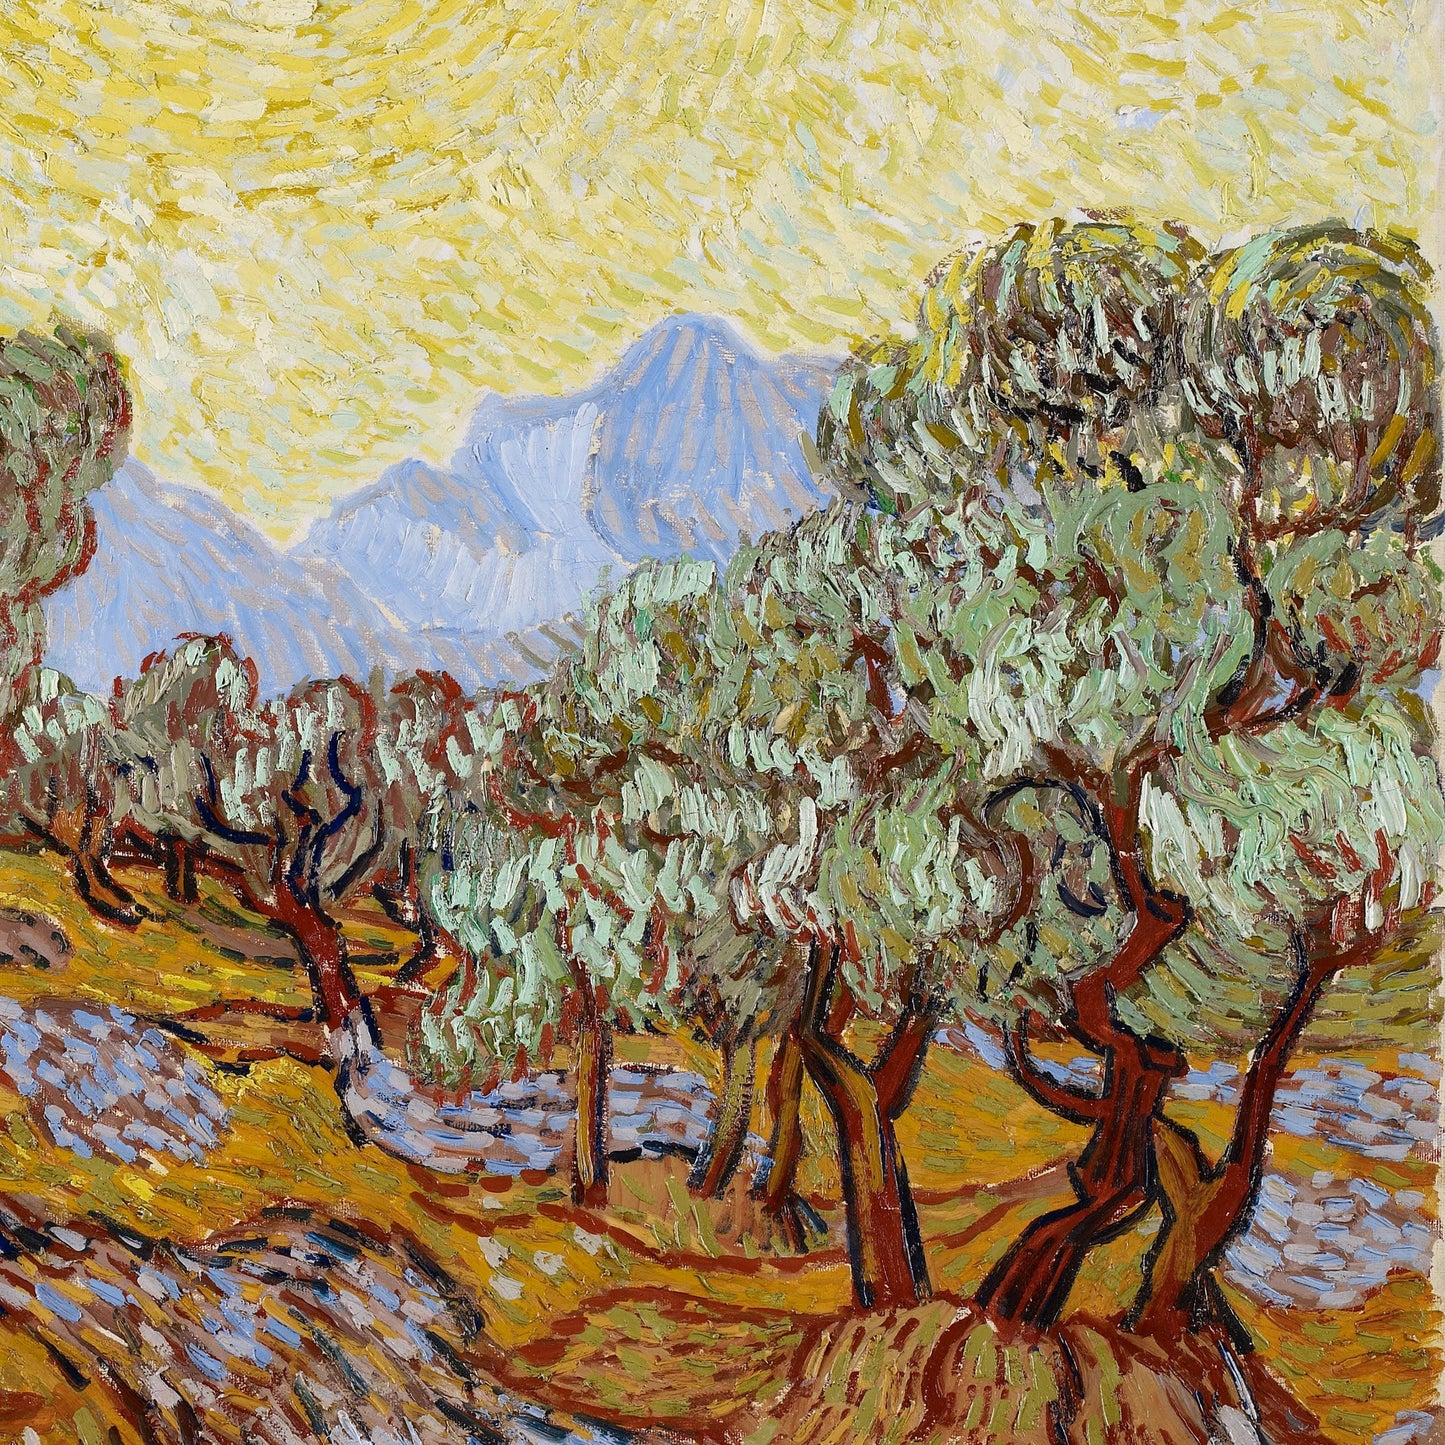 Olive Tress by Vincent Van Gogh, 3d Printed with texture and brush strokes looks like original oil-painting, code:225